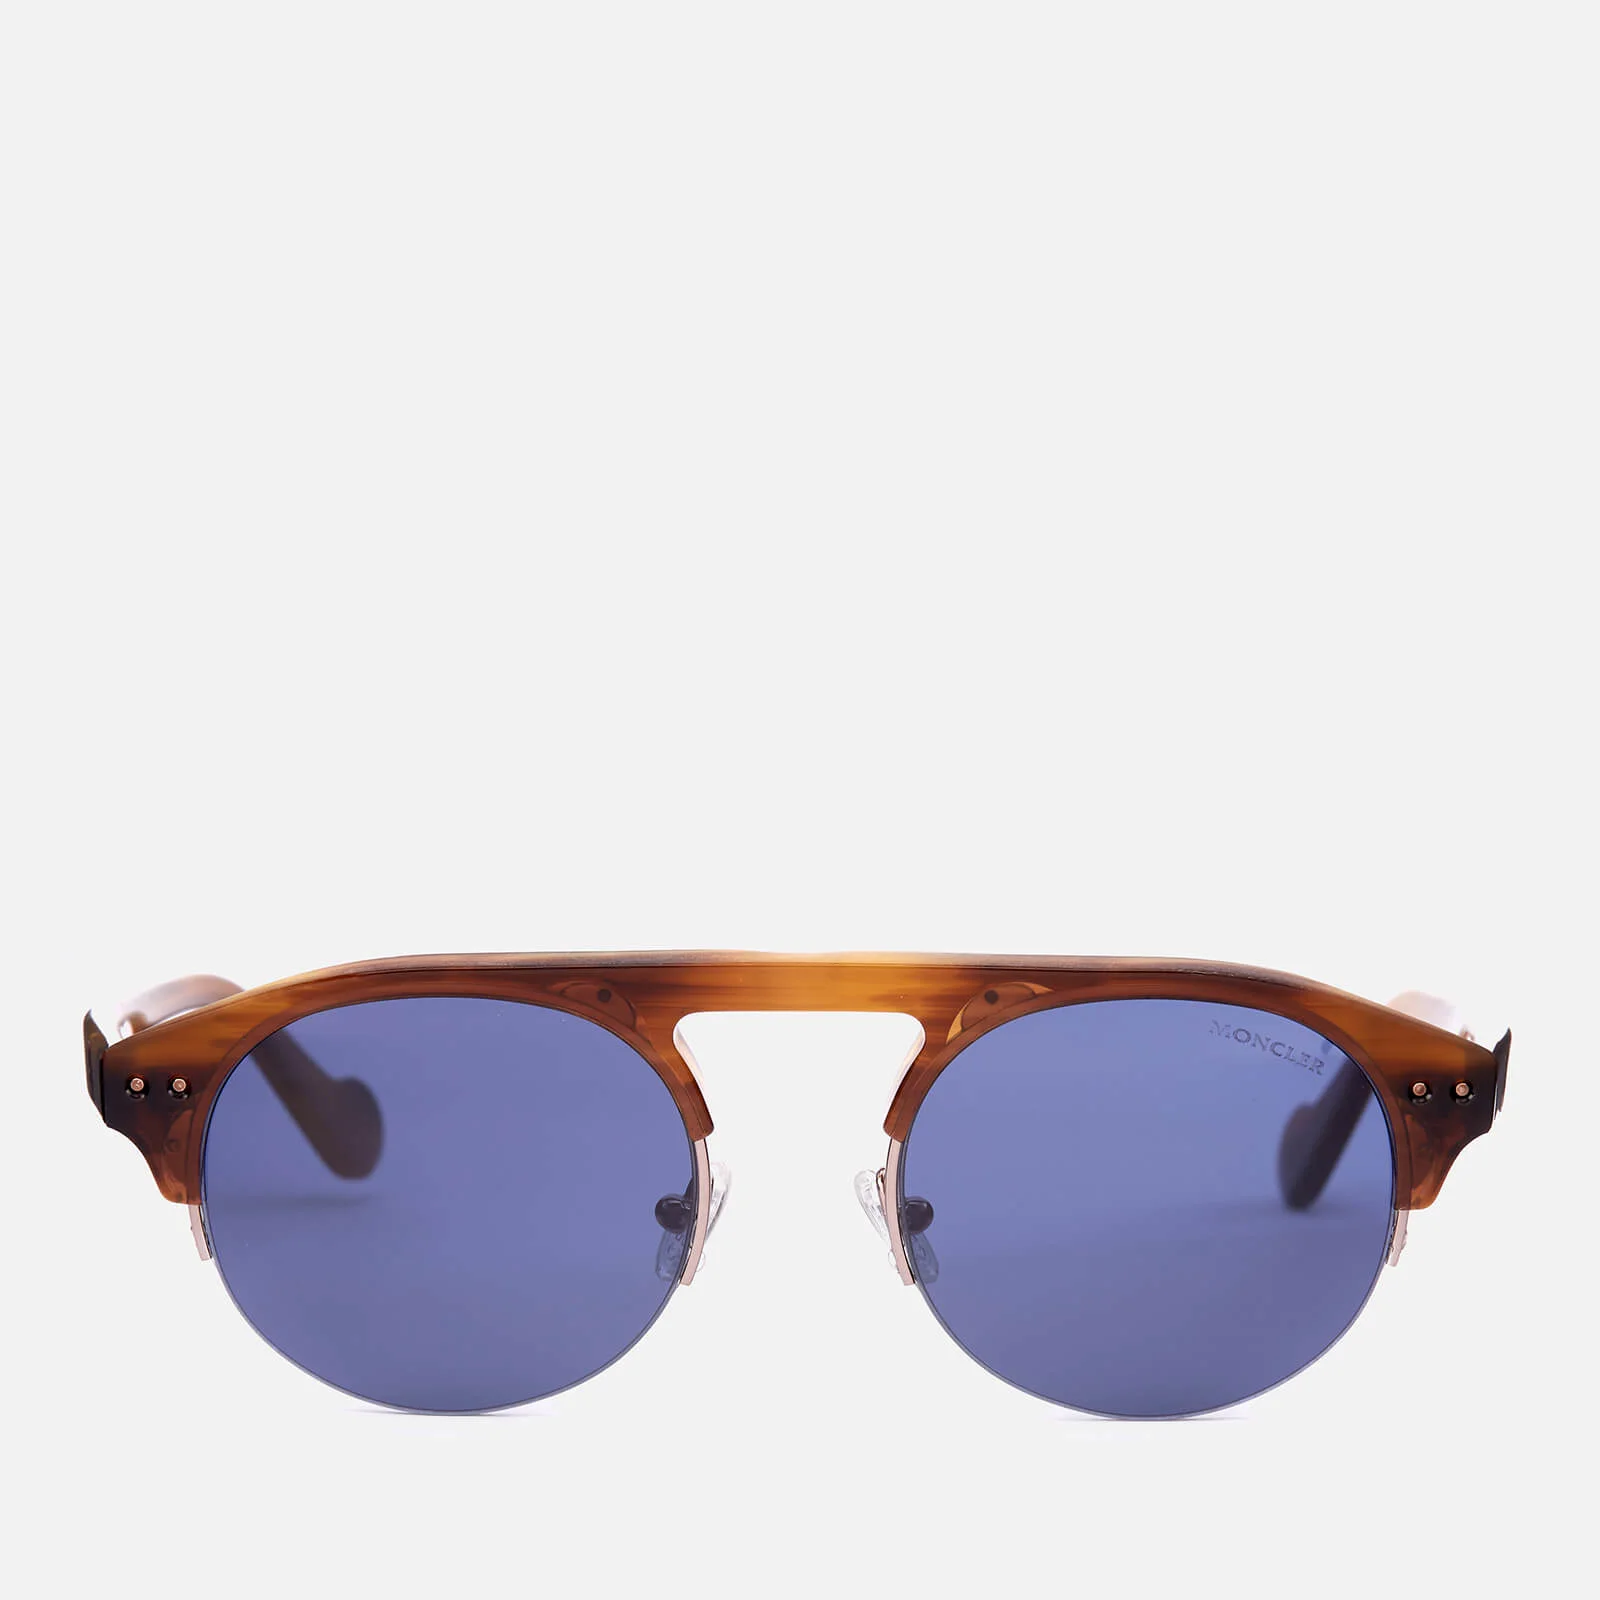 Moncler Men's Clubmaster Sunglasses - Light Brown/Other/Blue Image 1